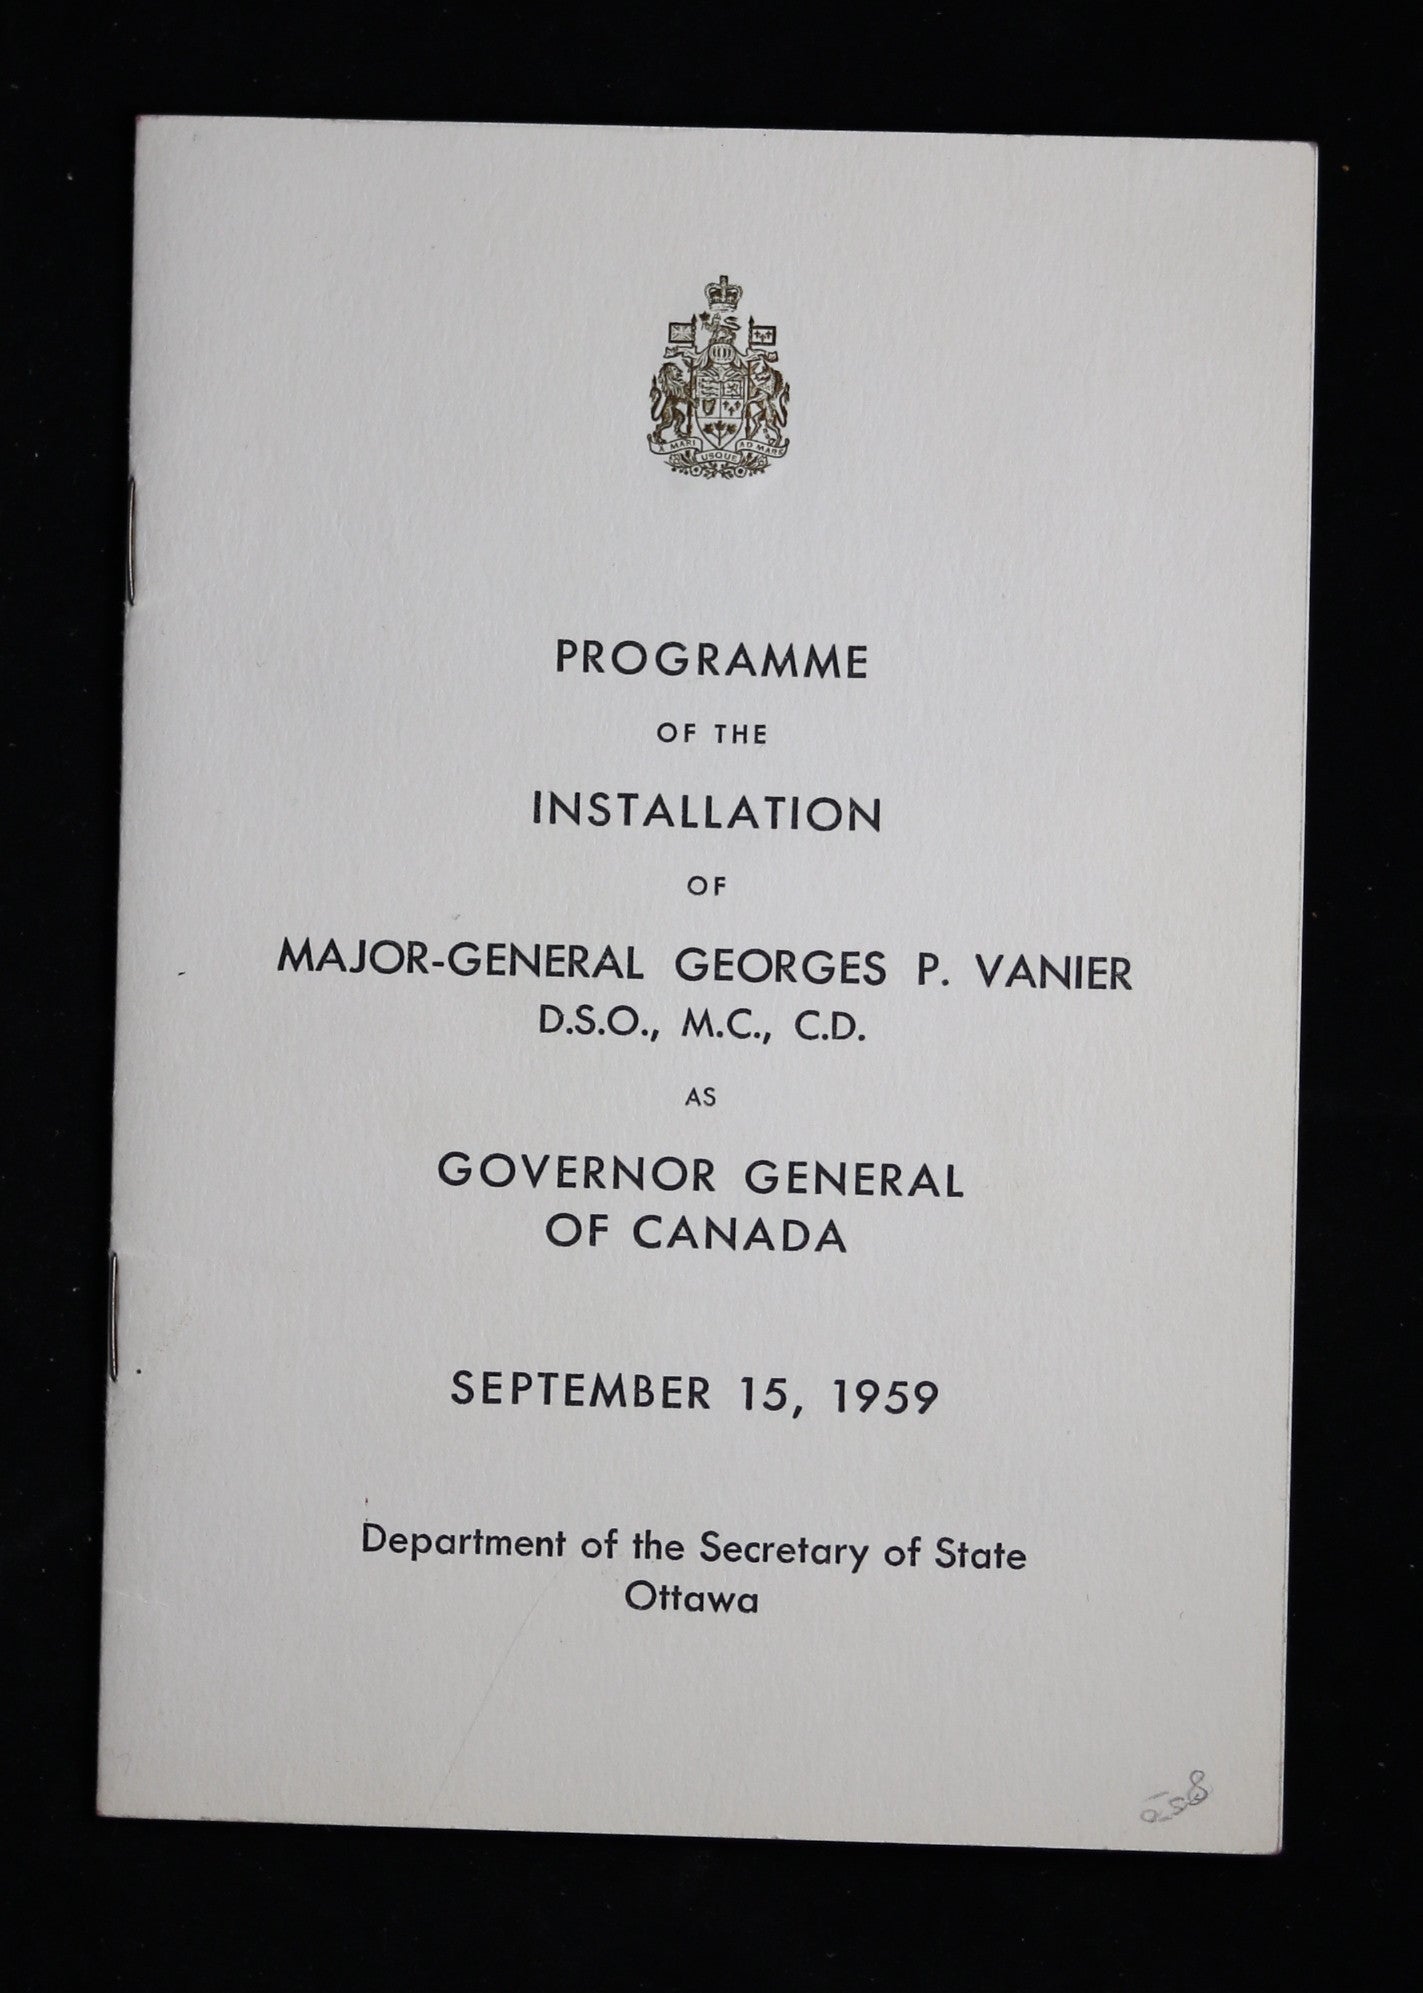 1959 Programme + ticket for the Installation of Georges Vanier as Governor General of Canada